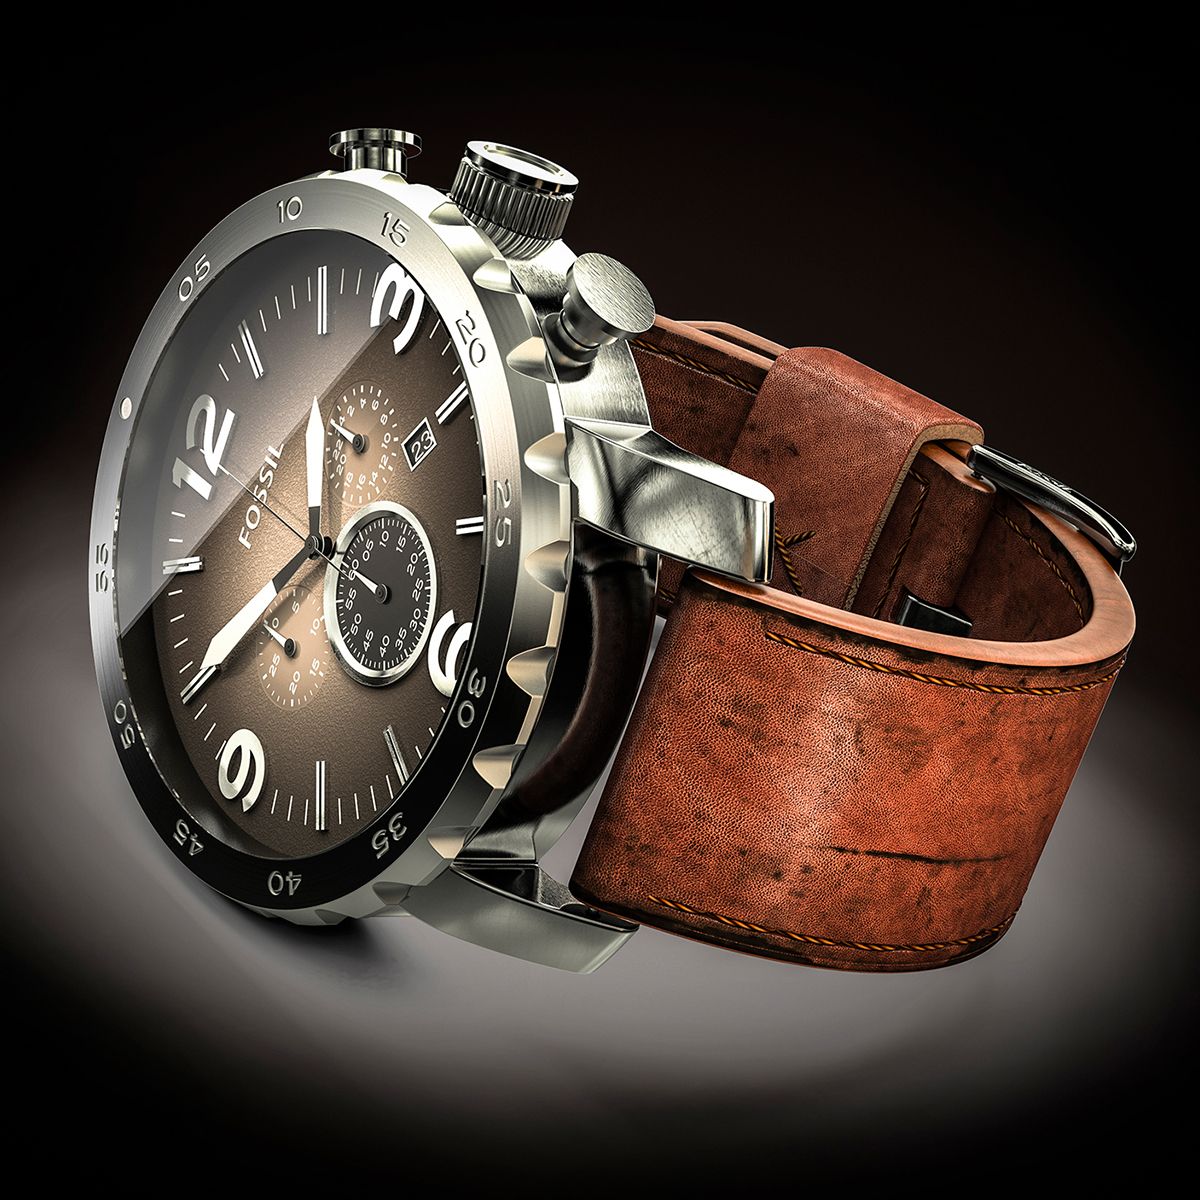 Fossil Watches For Men An Overview Of Top 10 Fossil Models | vlr.eng.br